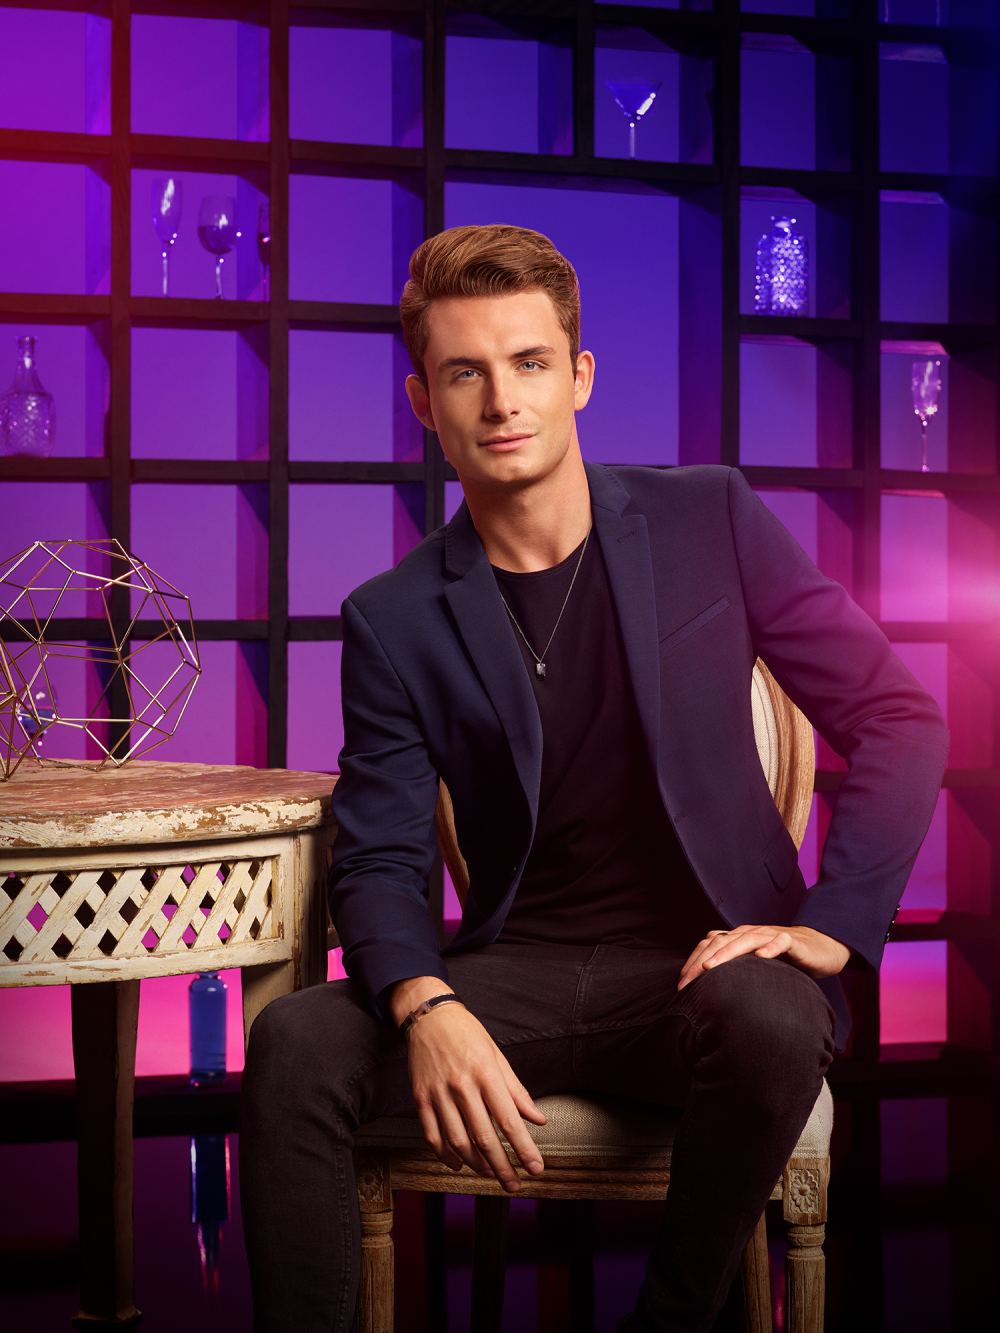 9 Most Insane Moments From the ‘Vanderpump Rules’ Season 7 Trailer